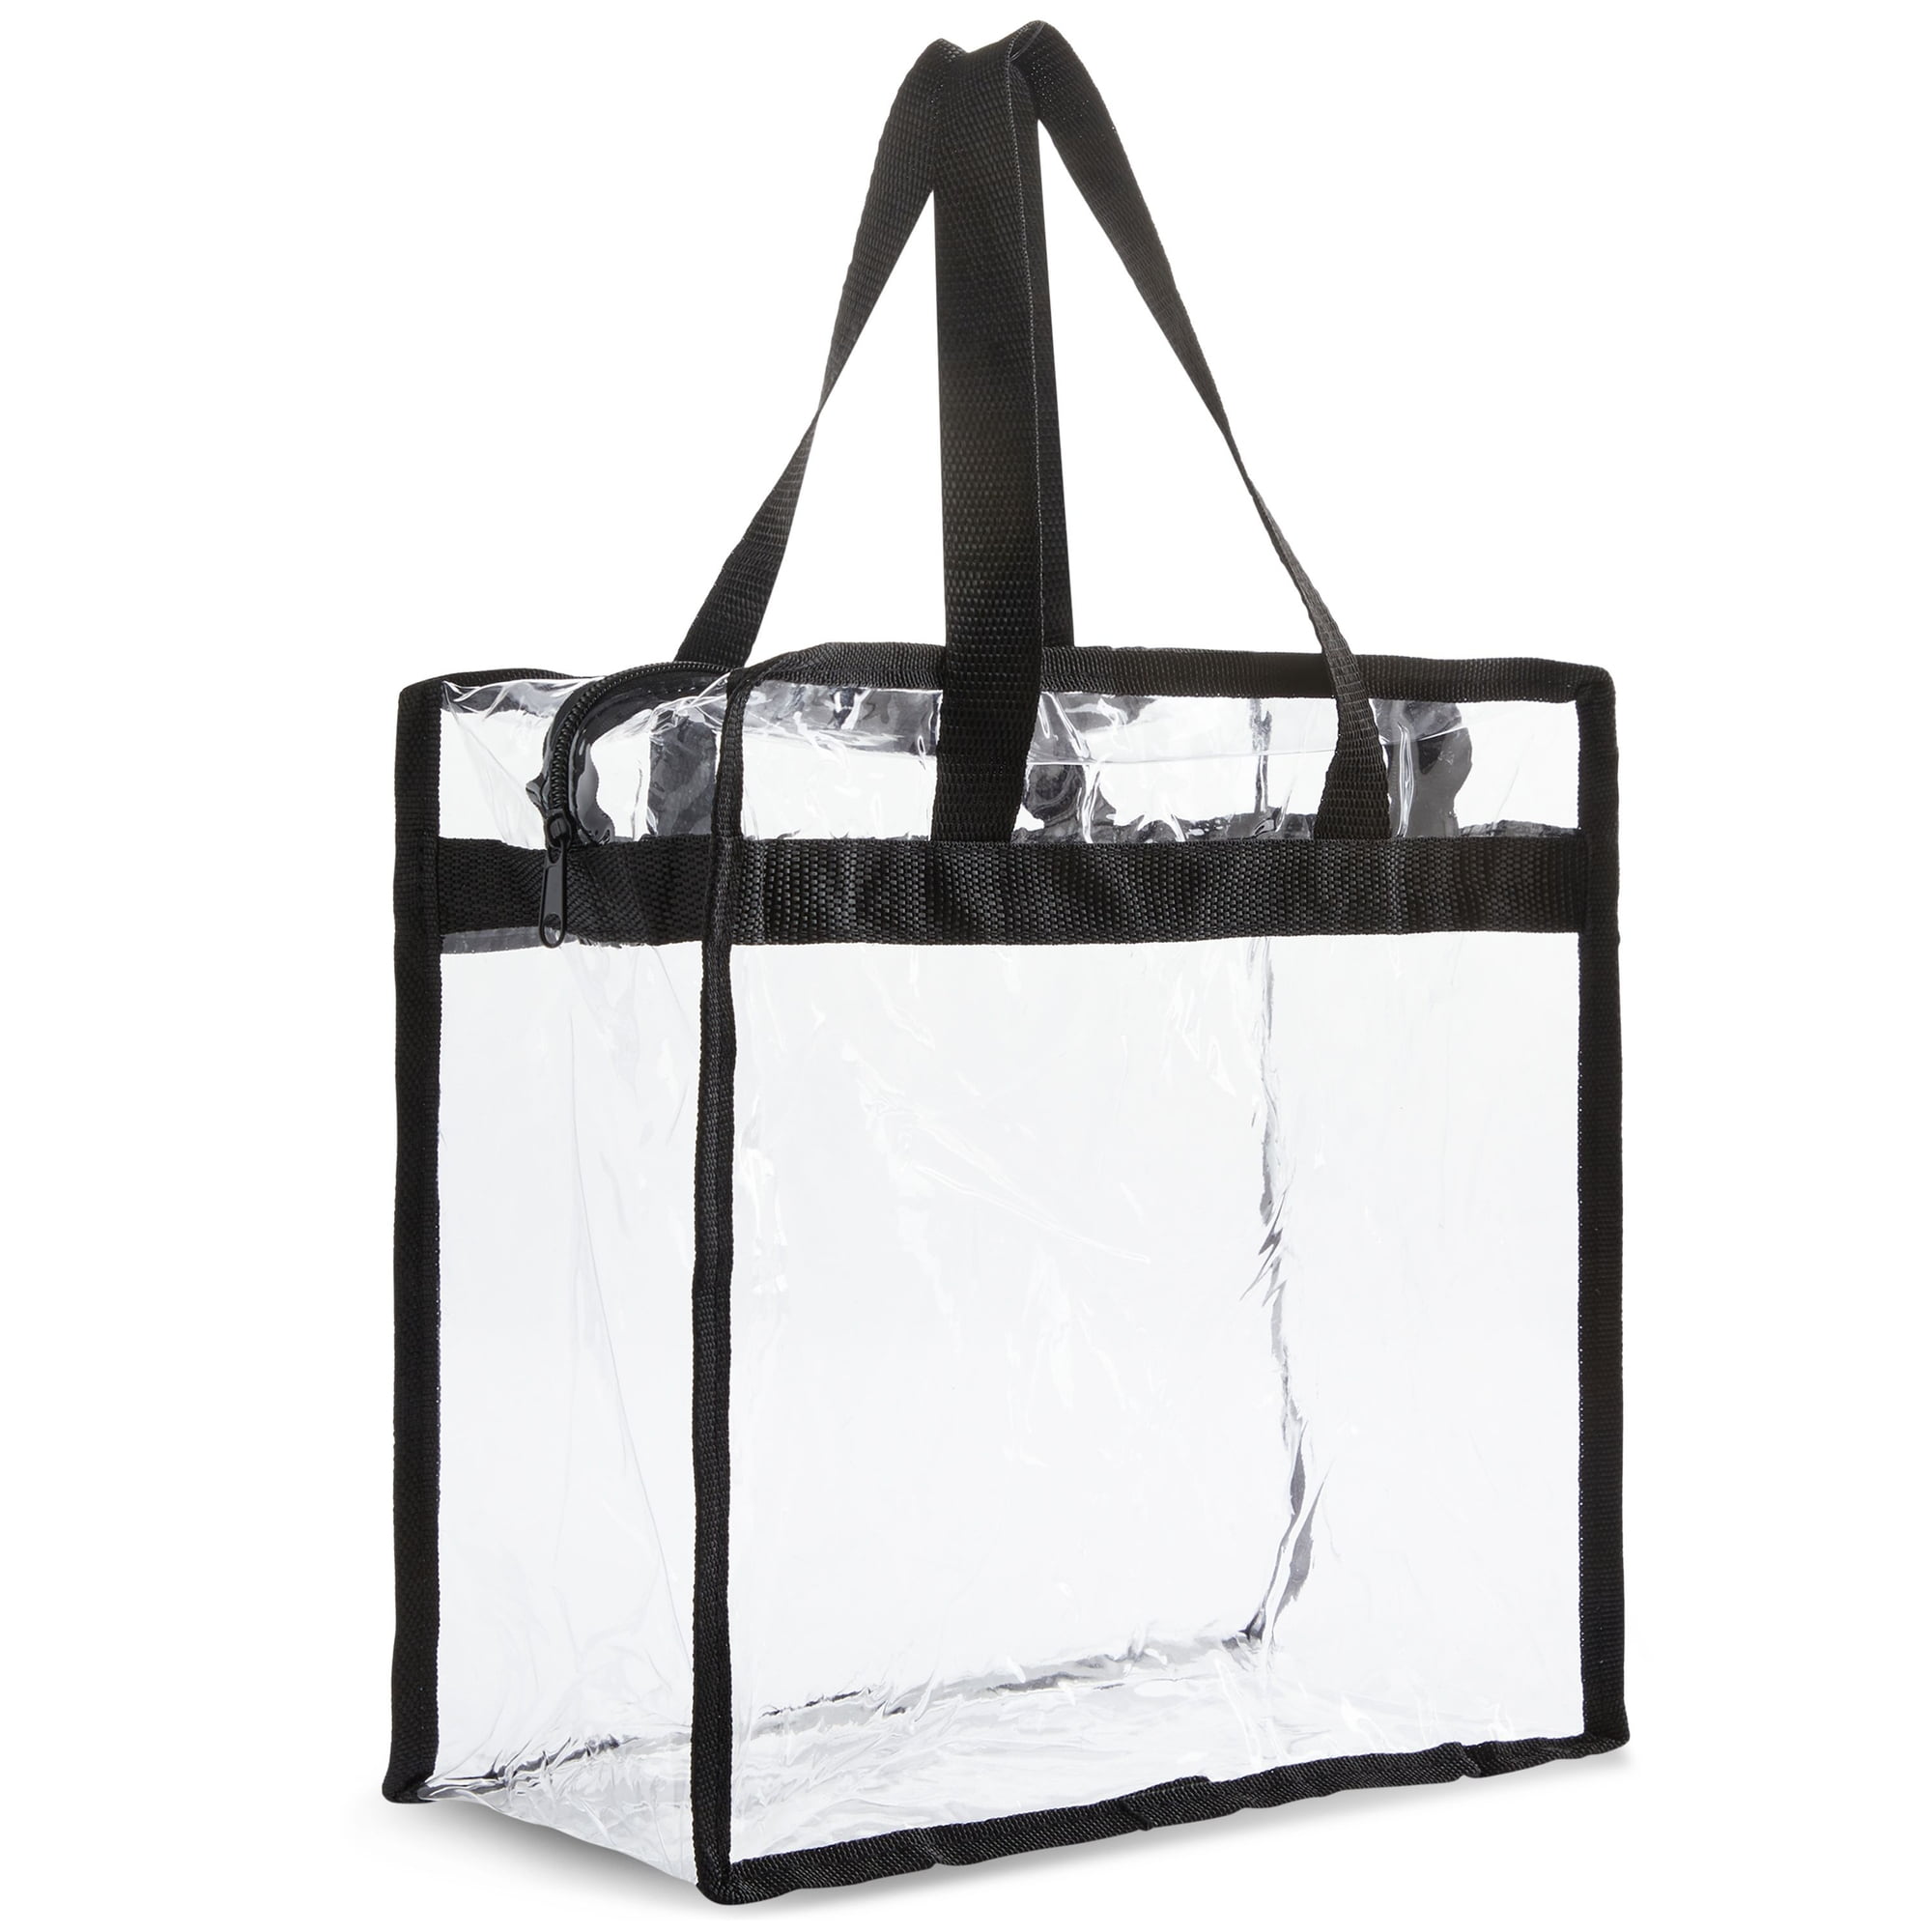 Bags for Less [Set of 2] Clear Bag Stadium Approved with Handles And Zipper  - 12 inch